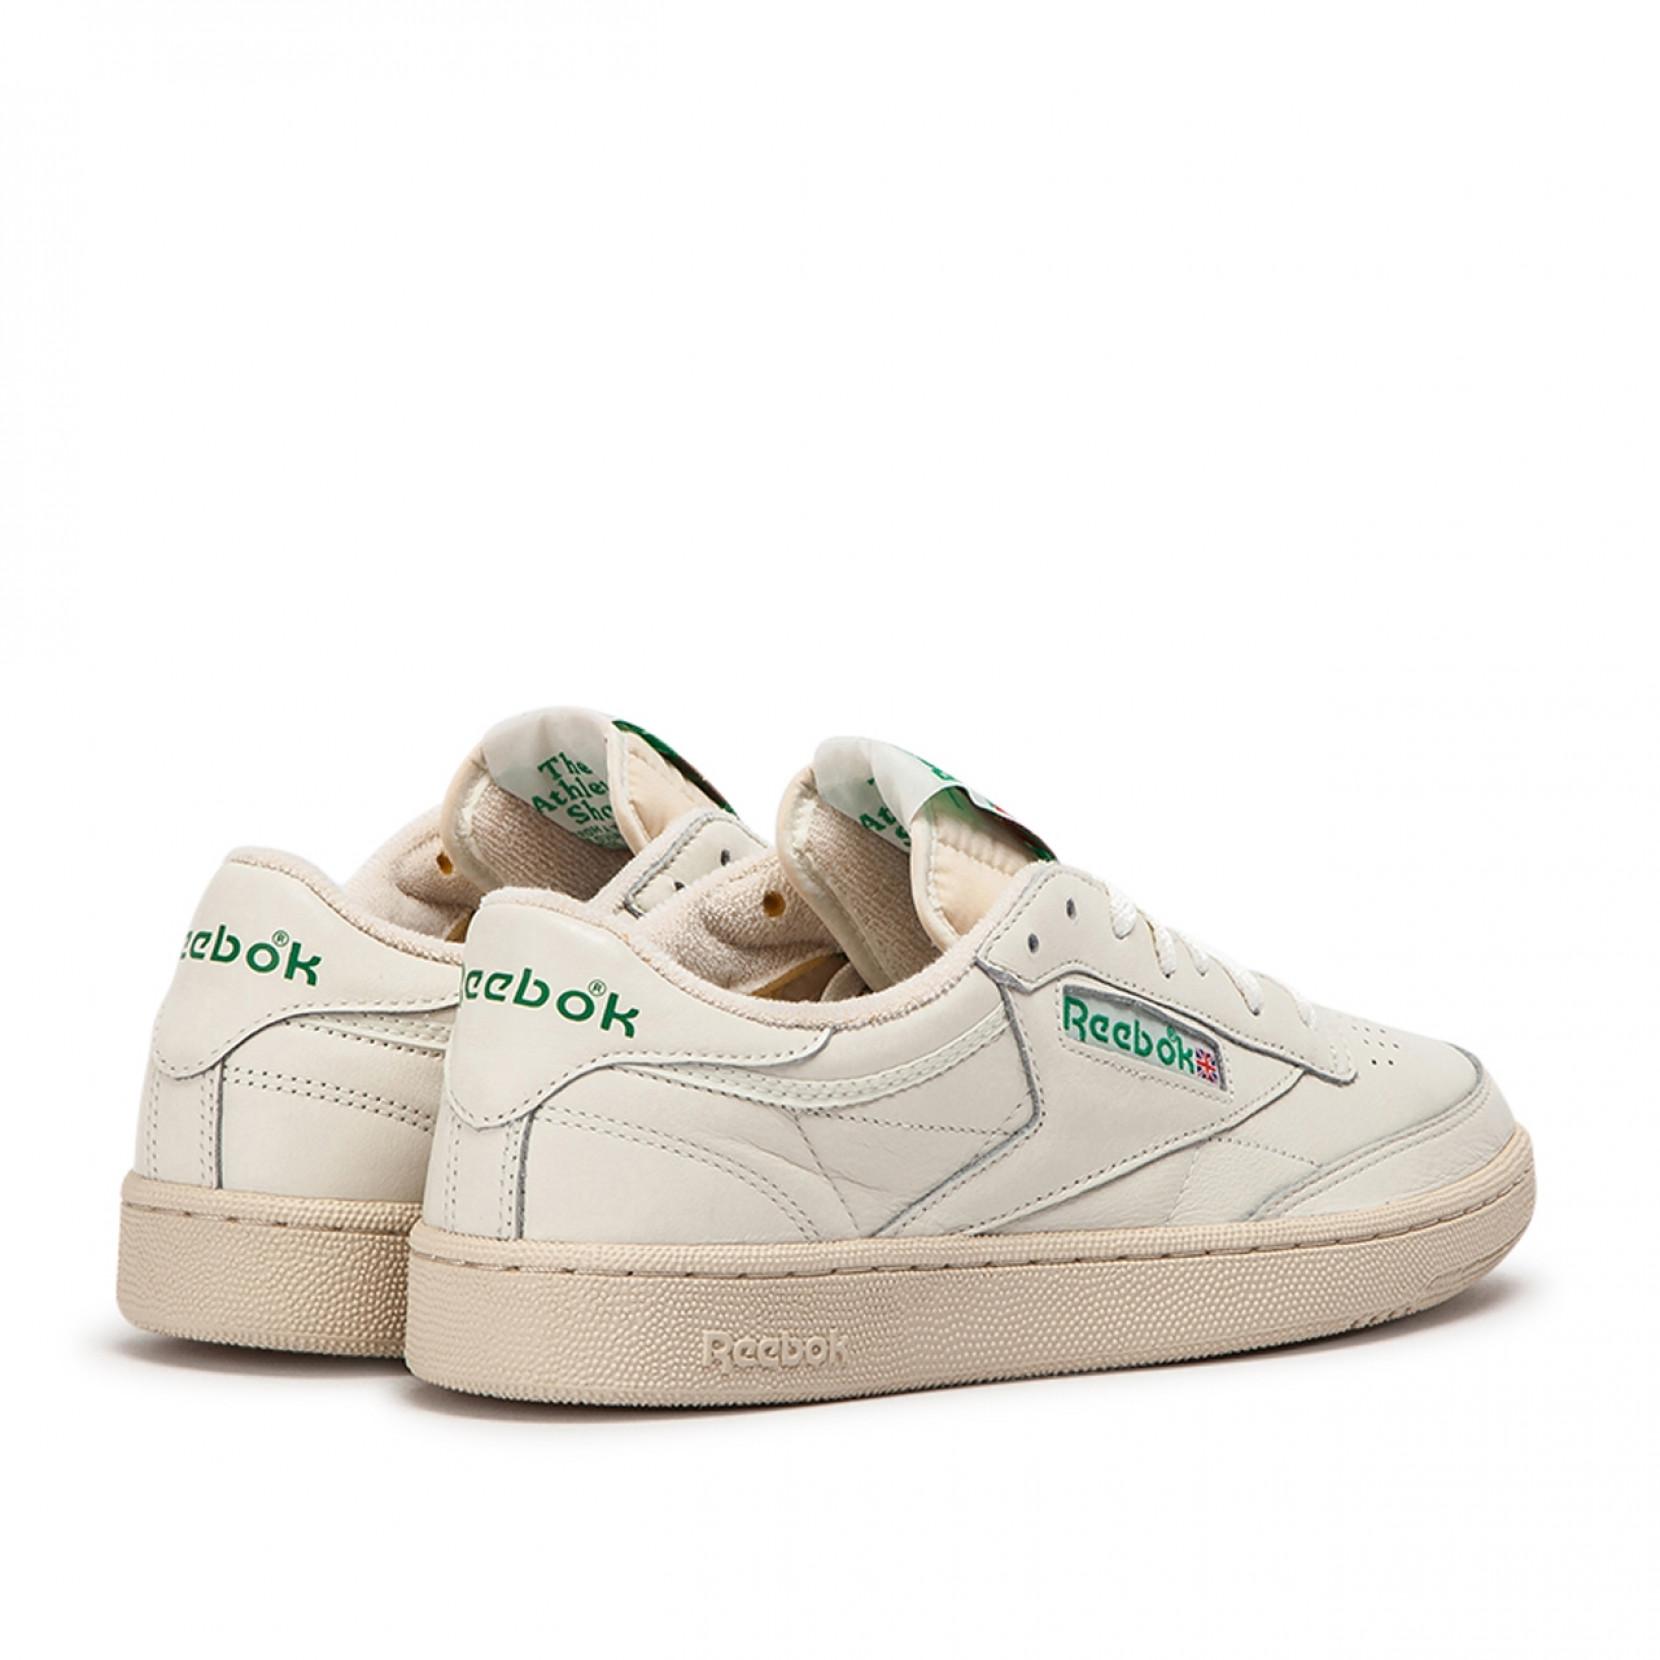 Reebok Leather Sneakers Club C 1985 Tv in Beige (Natural) for Men - Lyst